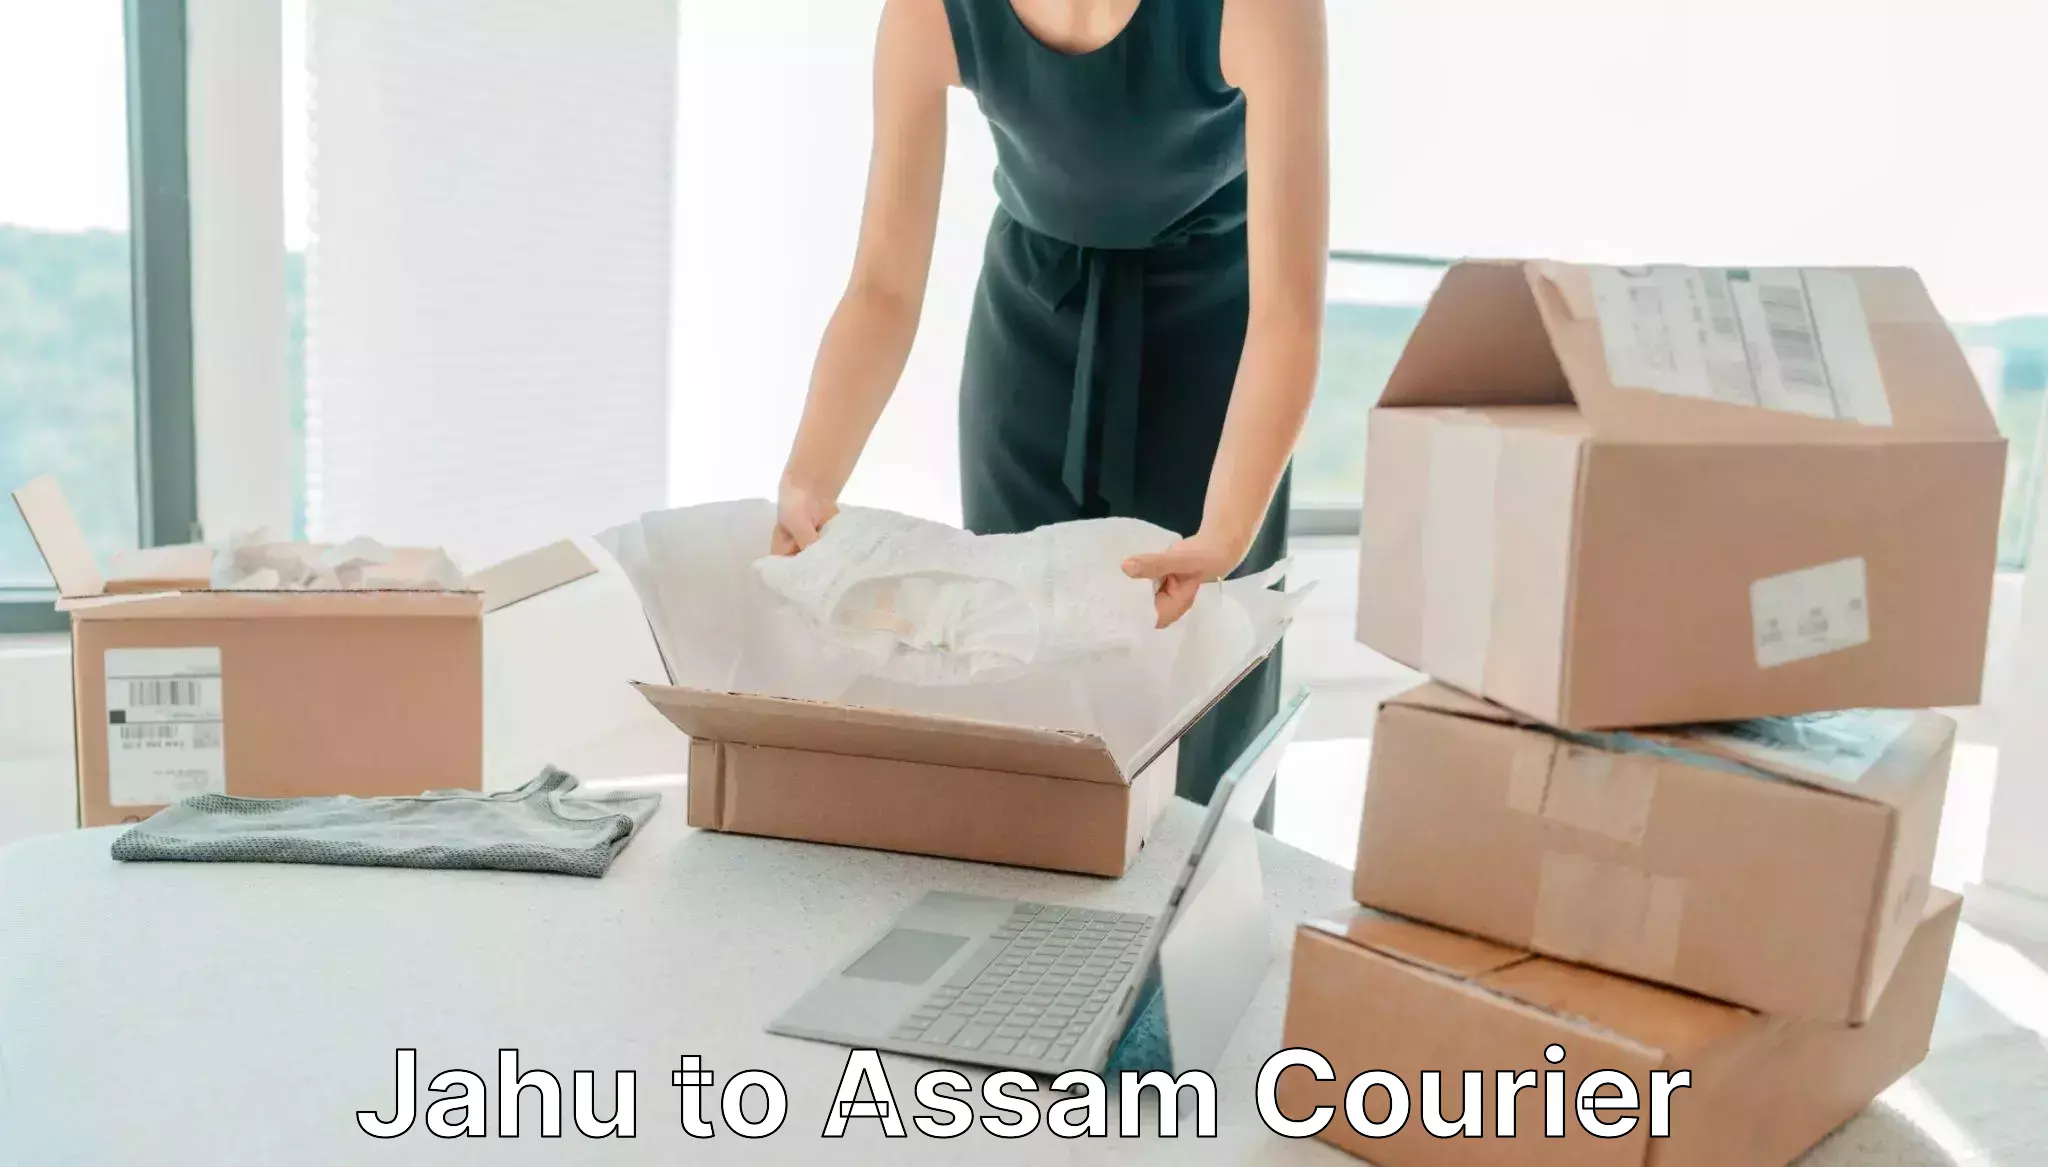 Business delivery service Jahu to Assam